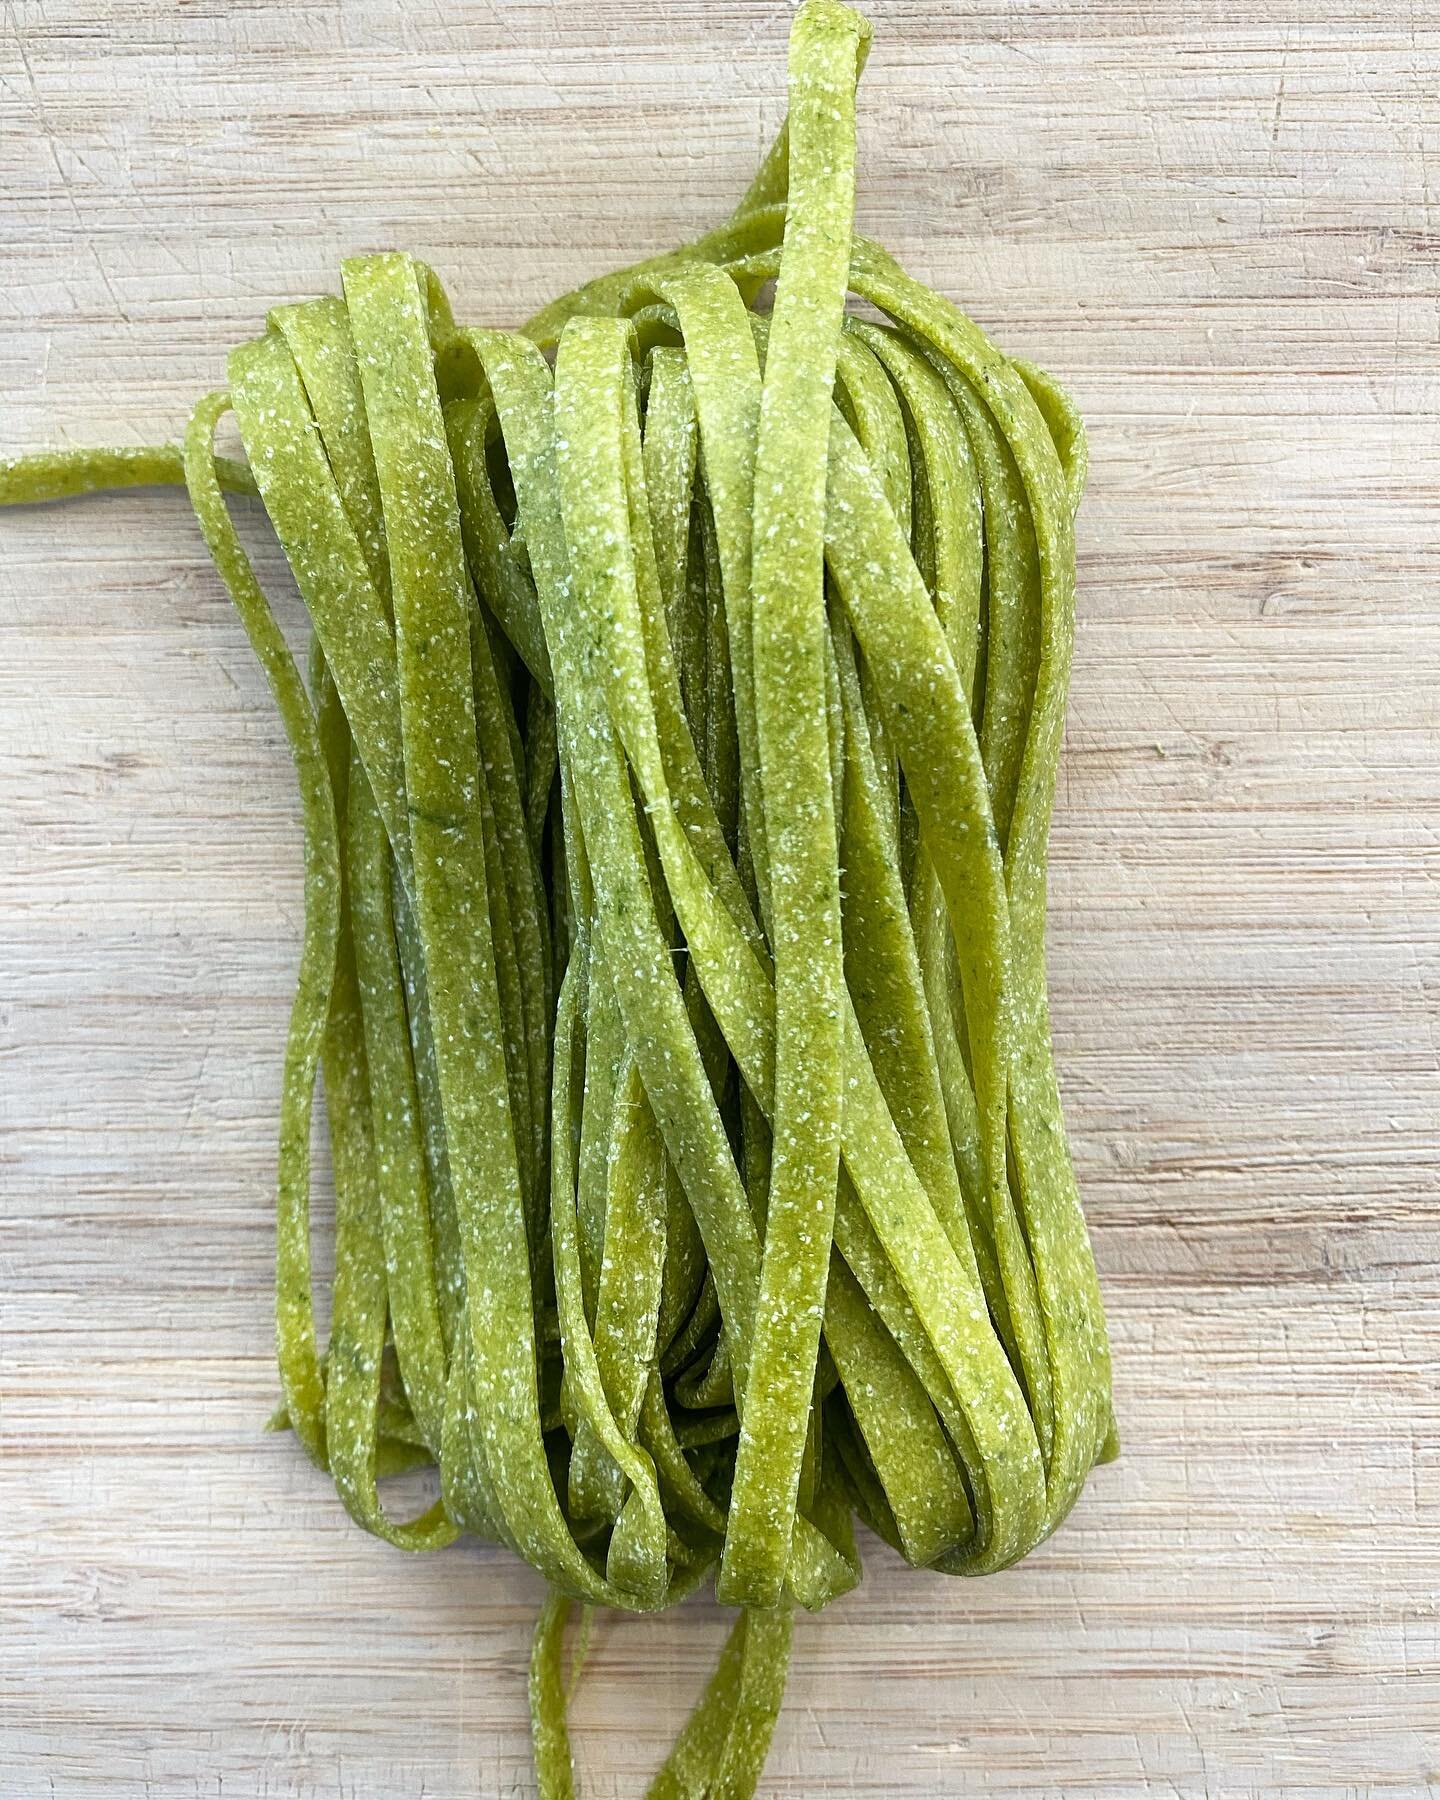 {fettuccine}

Green or yellow ? 
Which is your favourite?
We made some ramson fettuccine today ! 
A presto!

See you @il__mattarello | artisan &amp; organic pasta lab est. 2014
The only pasta place in @torvehallernekbh ✨

#pastaisalwaysagoodidea 
#il